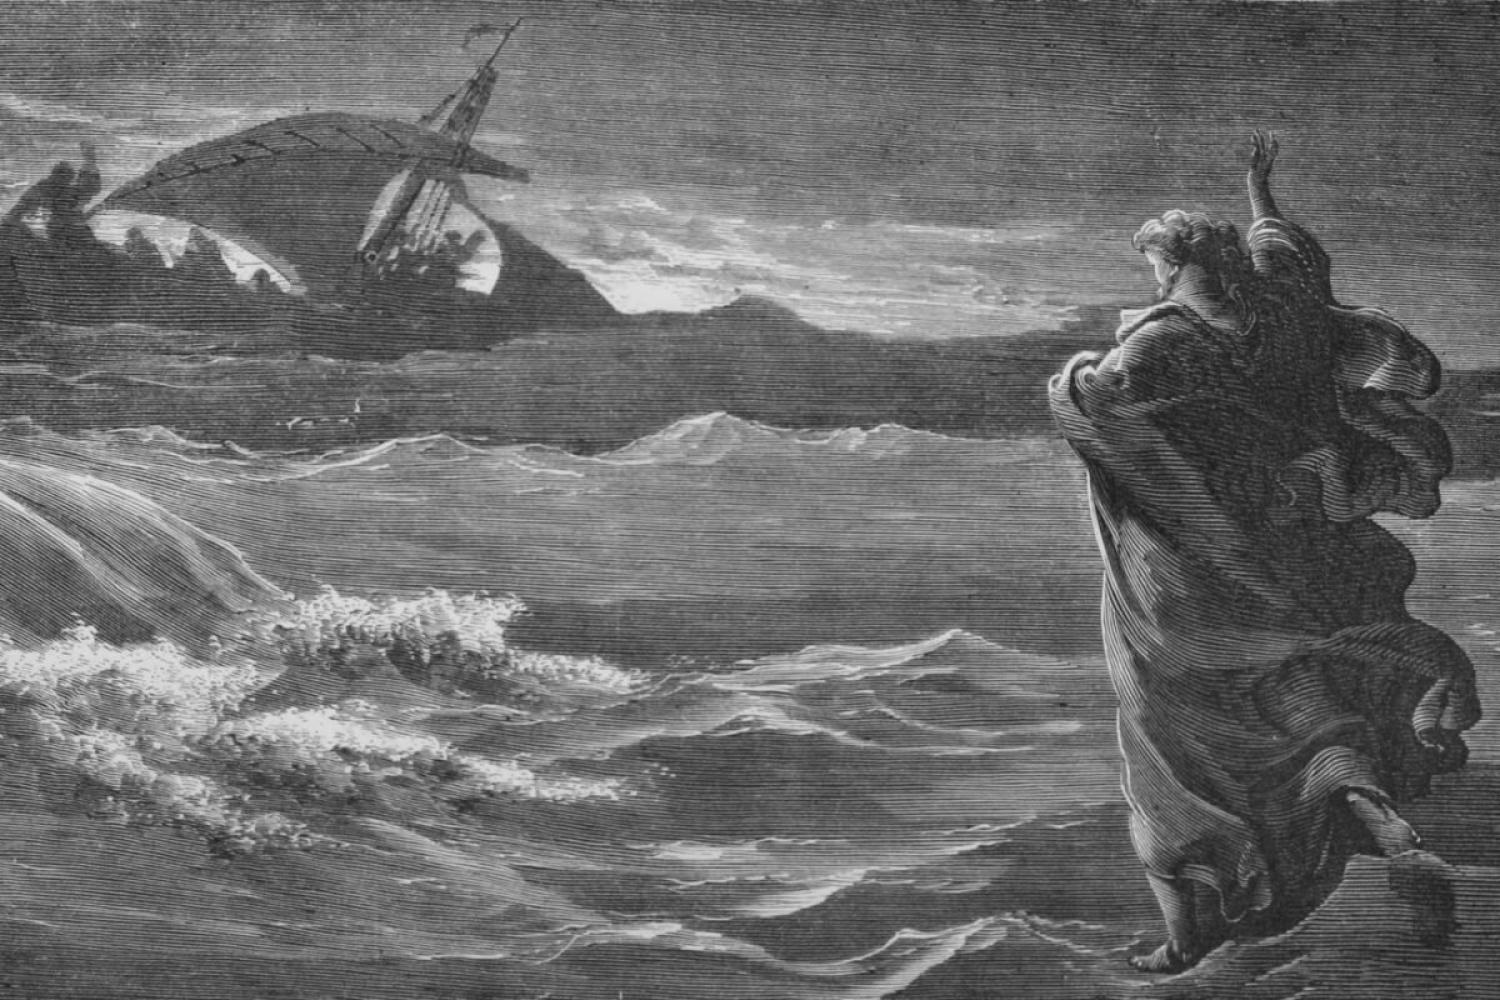 Gustave Dore's "Jesus Walking on the Sea"